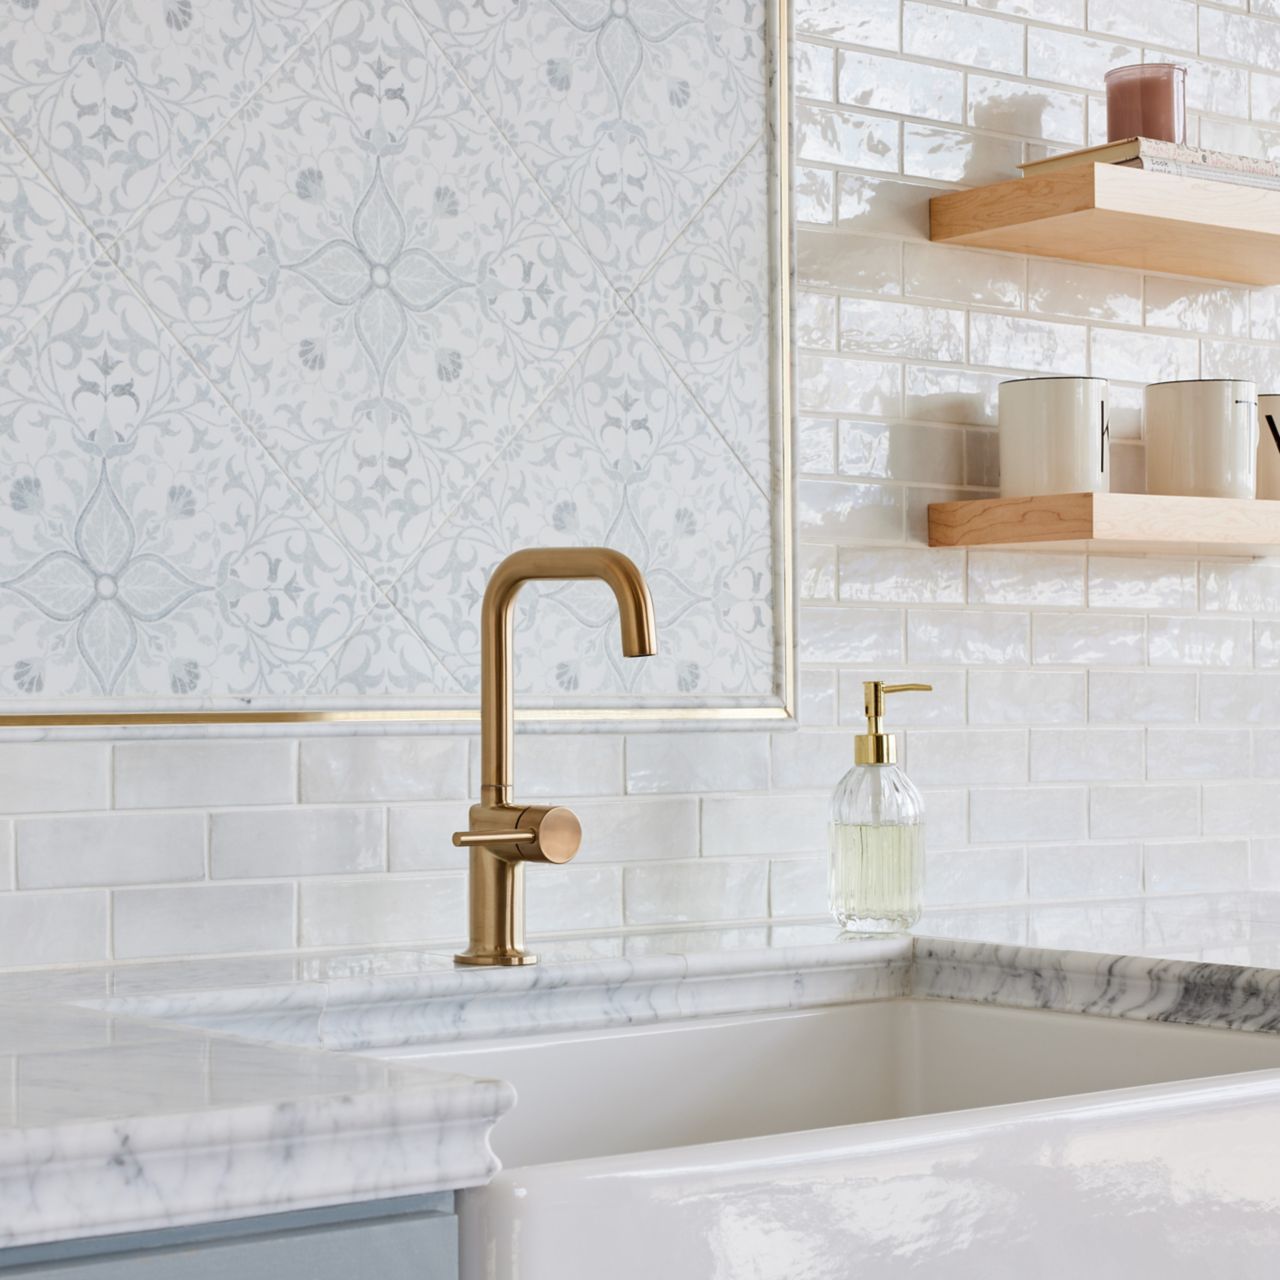 The wall behind a kitchen sink is completely tiled to create a large backsplash area. Patterned porcelain tile is framed with gold pencil trim pieces to create a decorative focal point directly above the sink, and glossy white subway tile is used for the surrounding wall. Floating shelves in a light wood tone flank either side of the patterned tile accent.